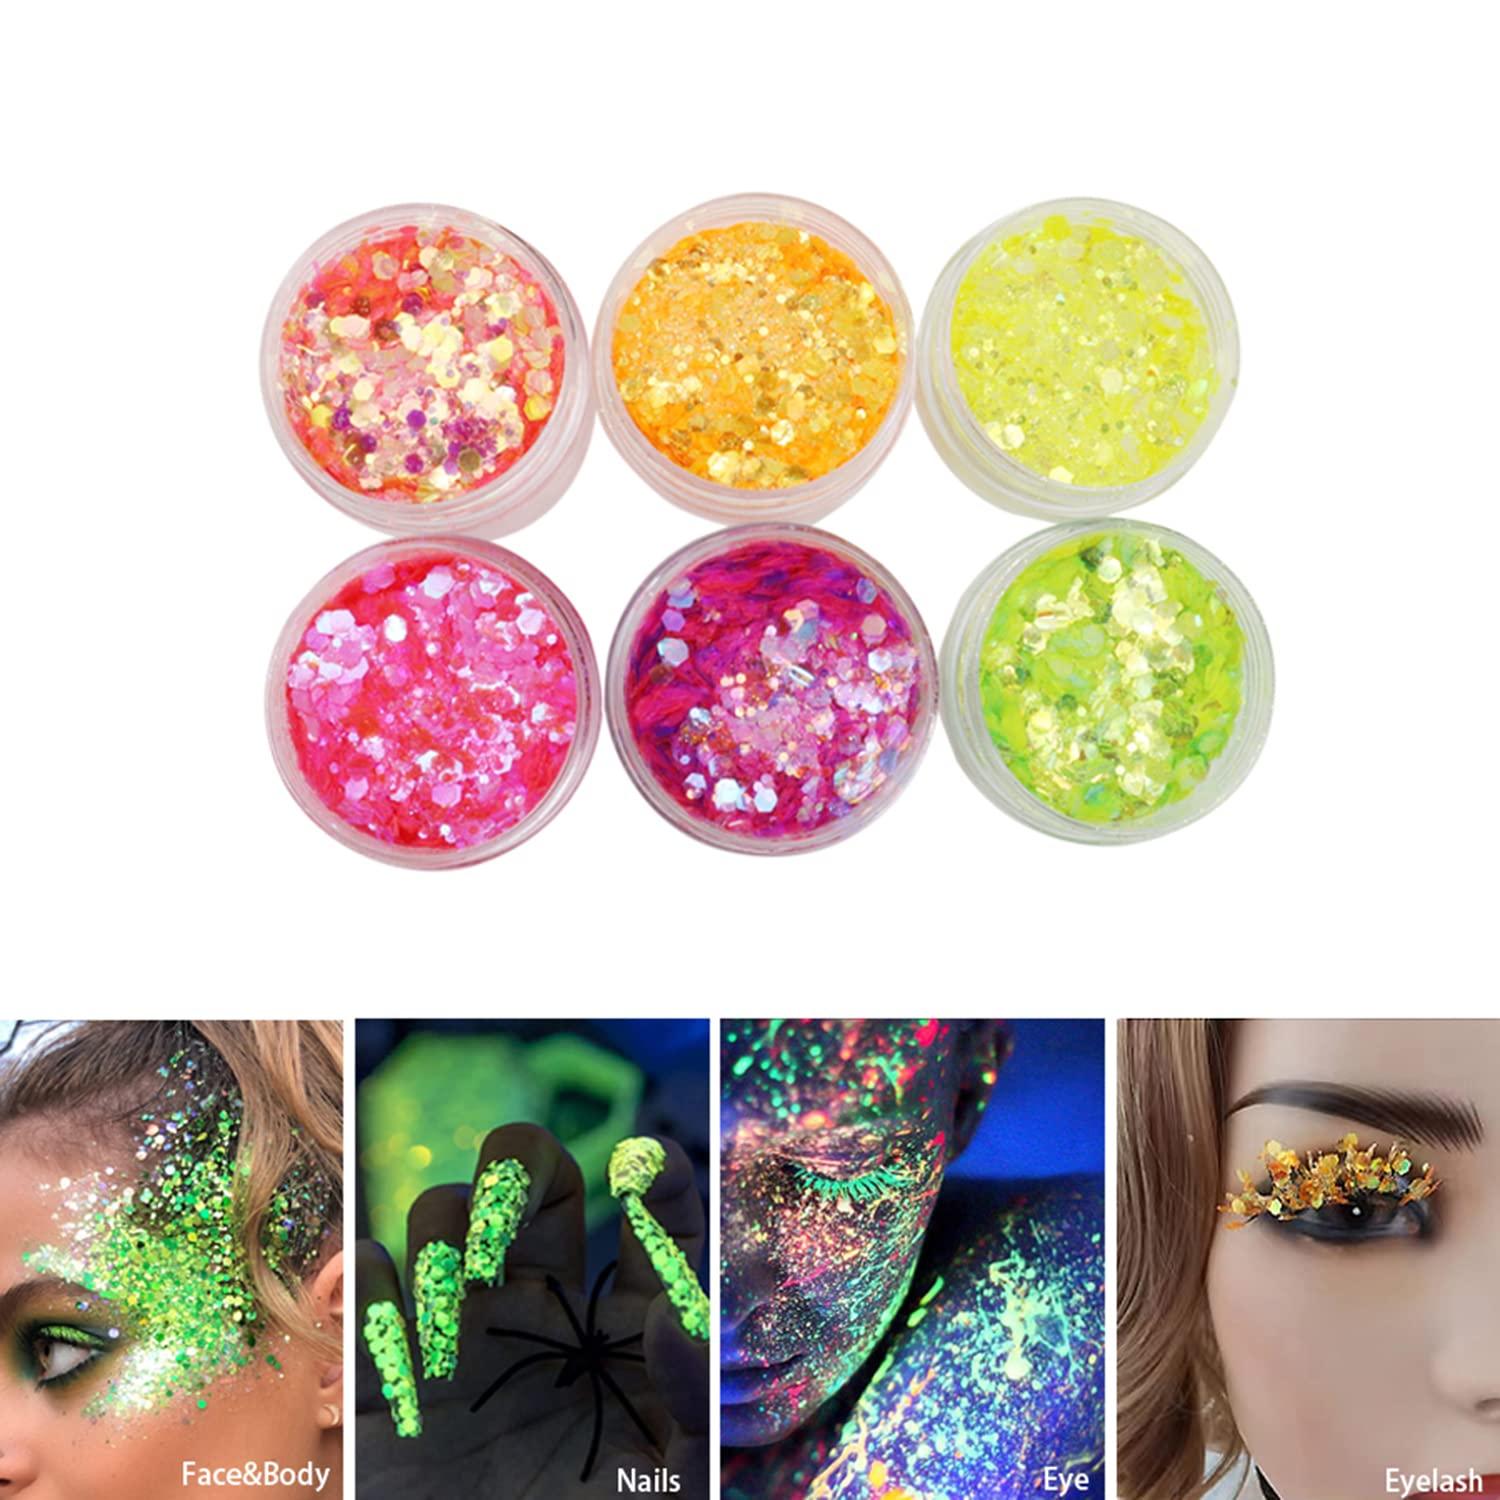 Glow in The Dark Glitter Eyeshadow Powder, Findinbeauty 6 Colors UV Glow  Blacklight Chunky Cosmetic Glitter for Crafts, Festival, Rave, Yoga, Body,  Face, Nails, Party Makeup 6color glitter